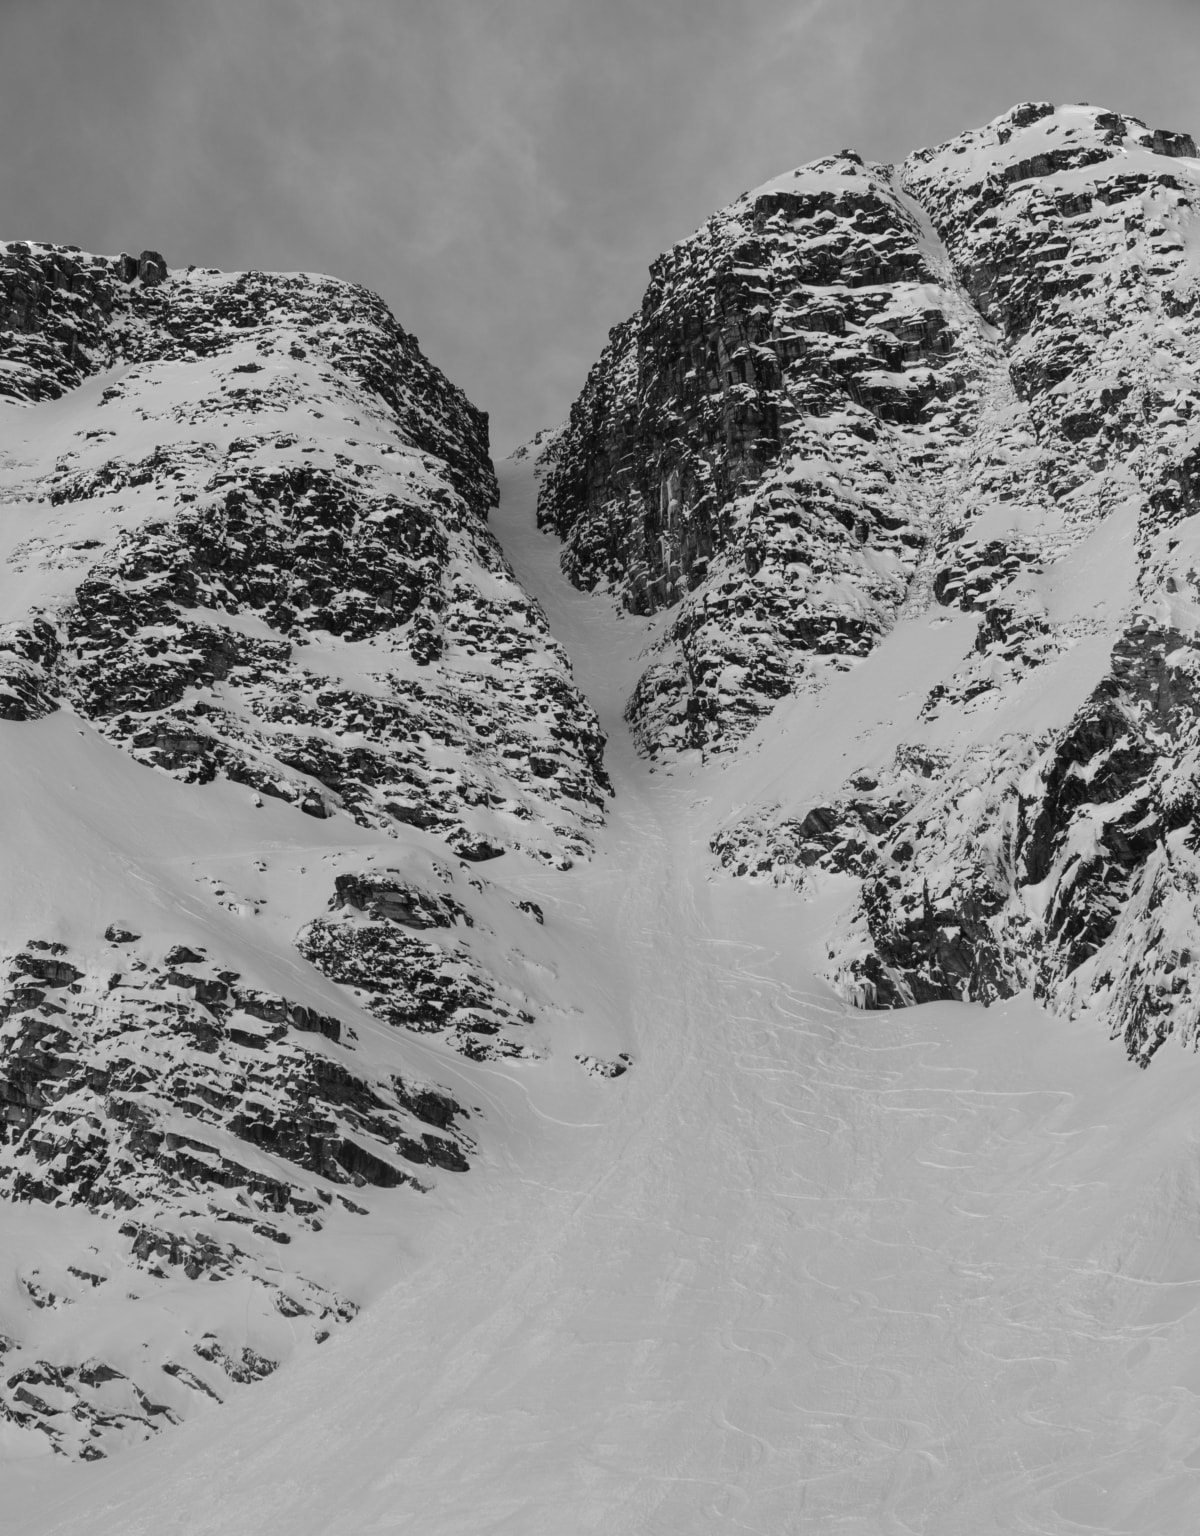 view of the forever young couloir